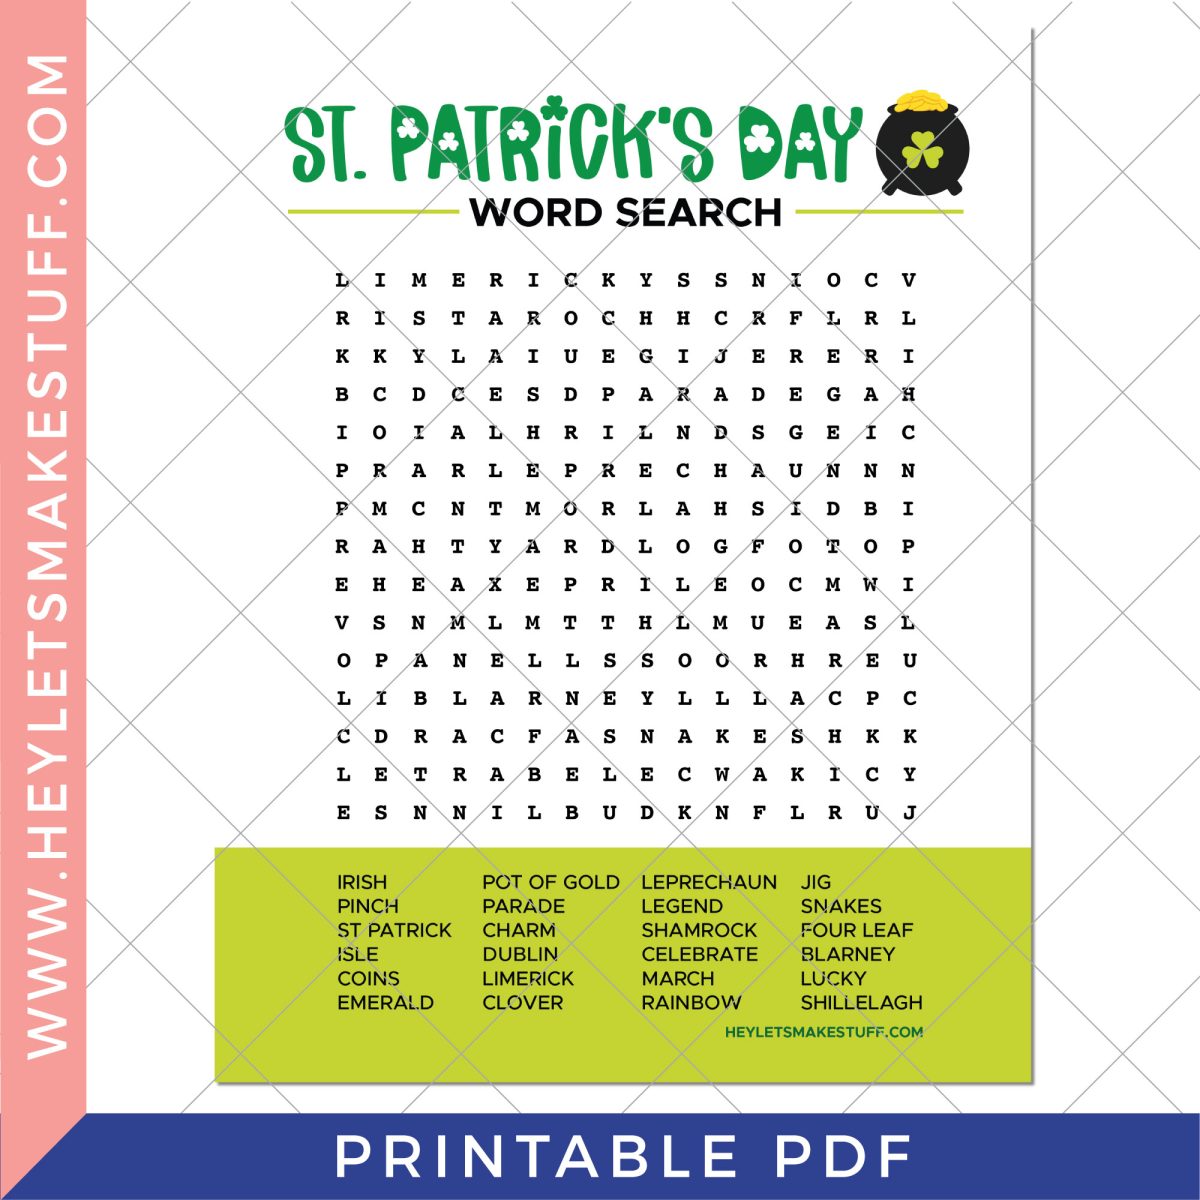 Security image of St. Patrick's Day word search.